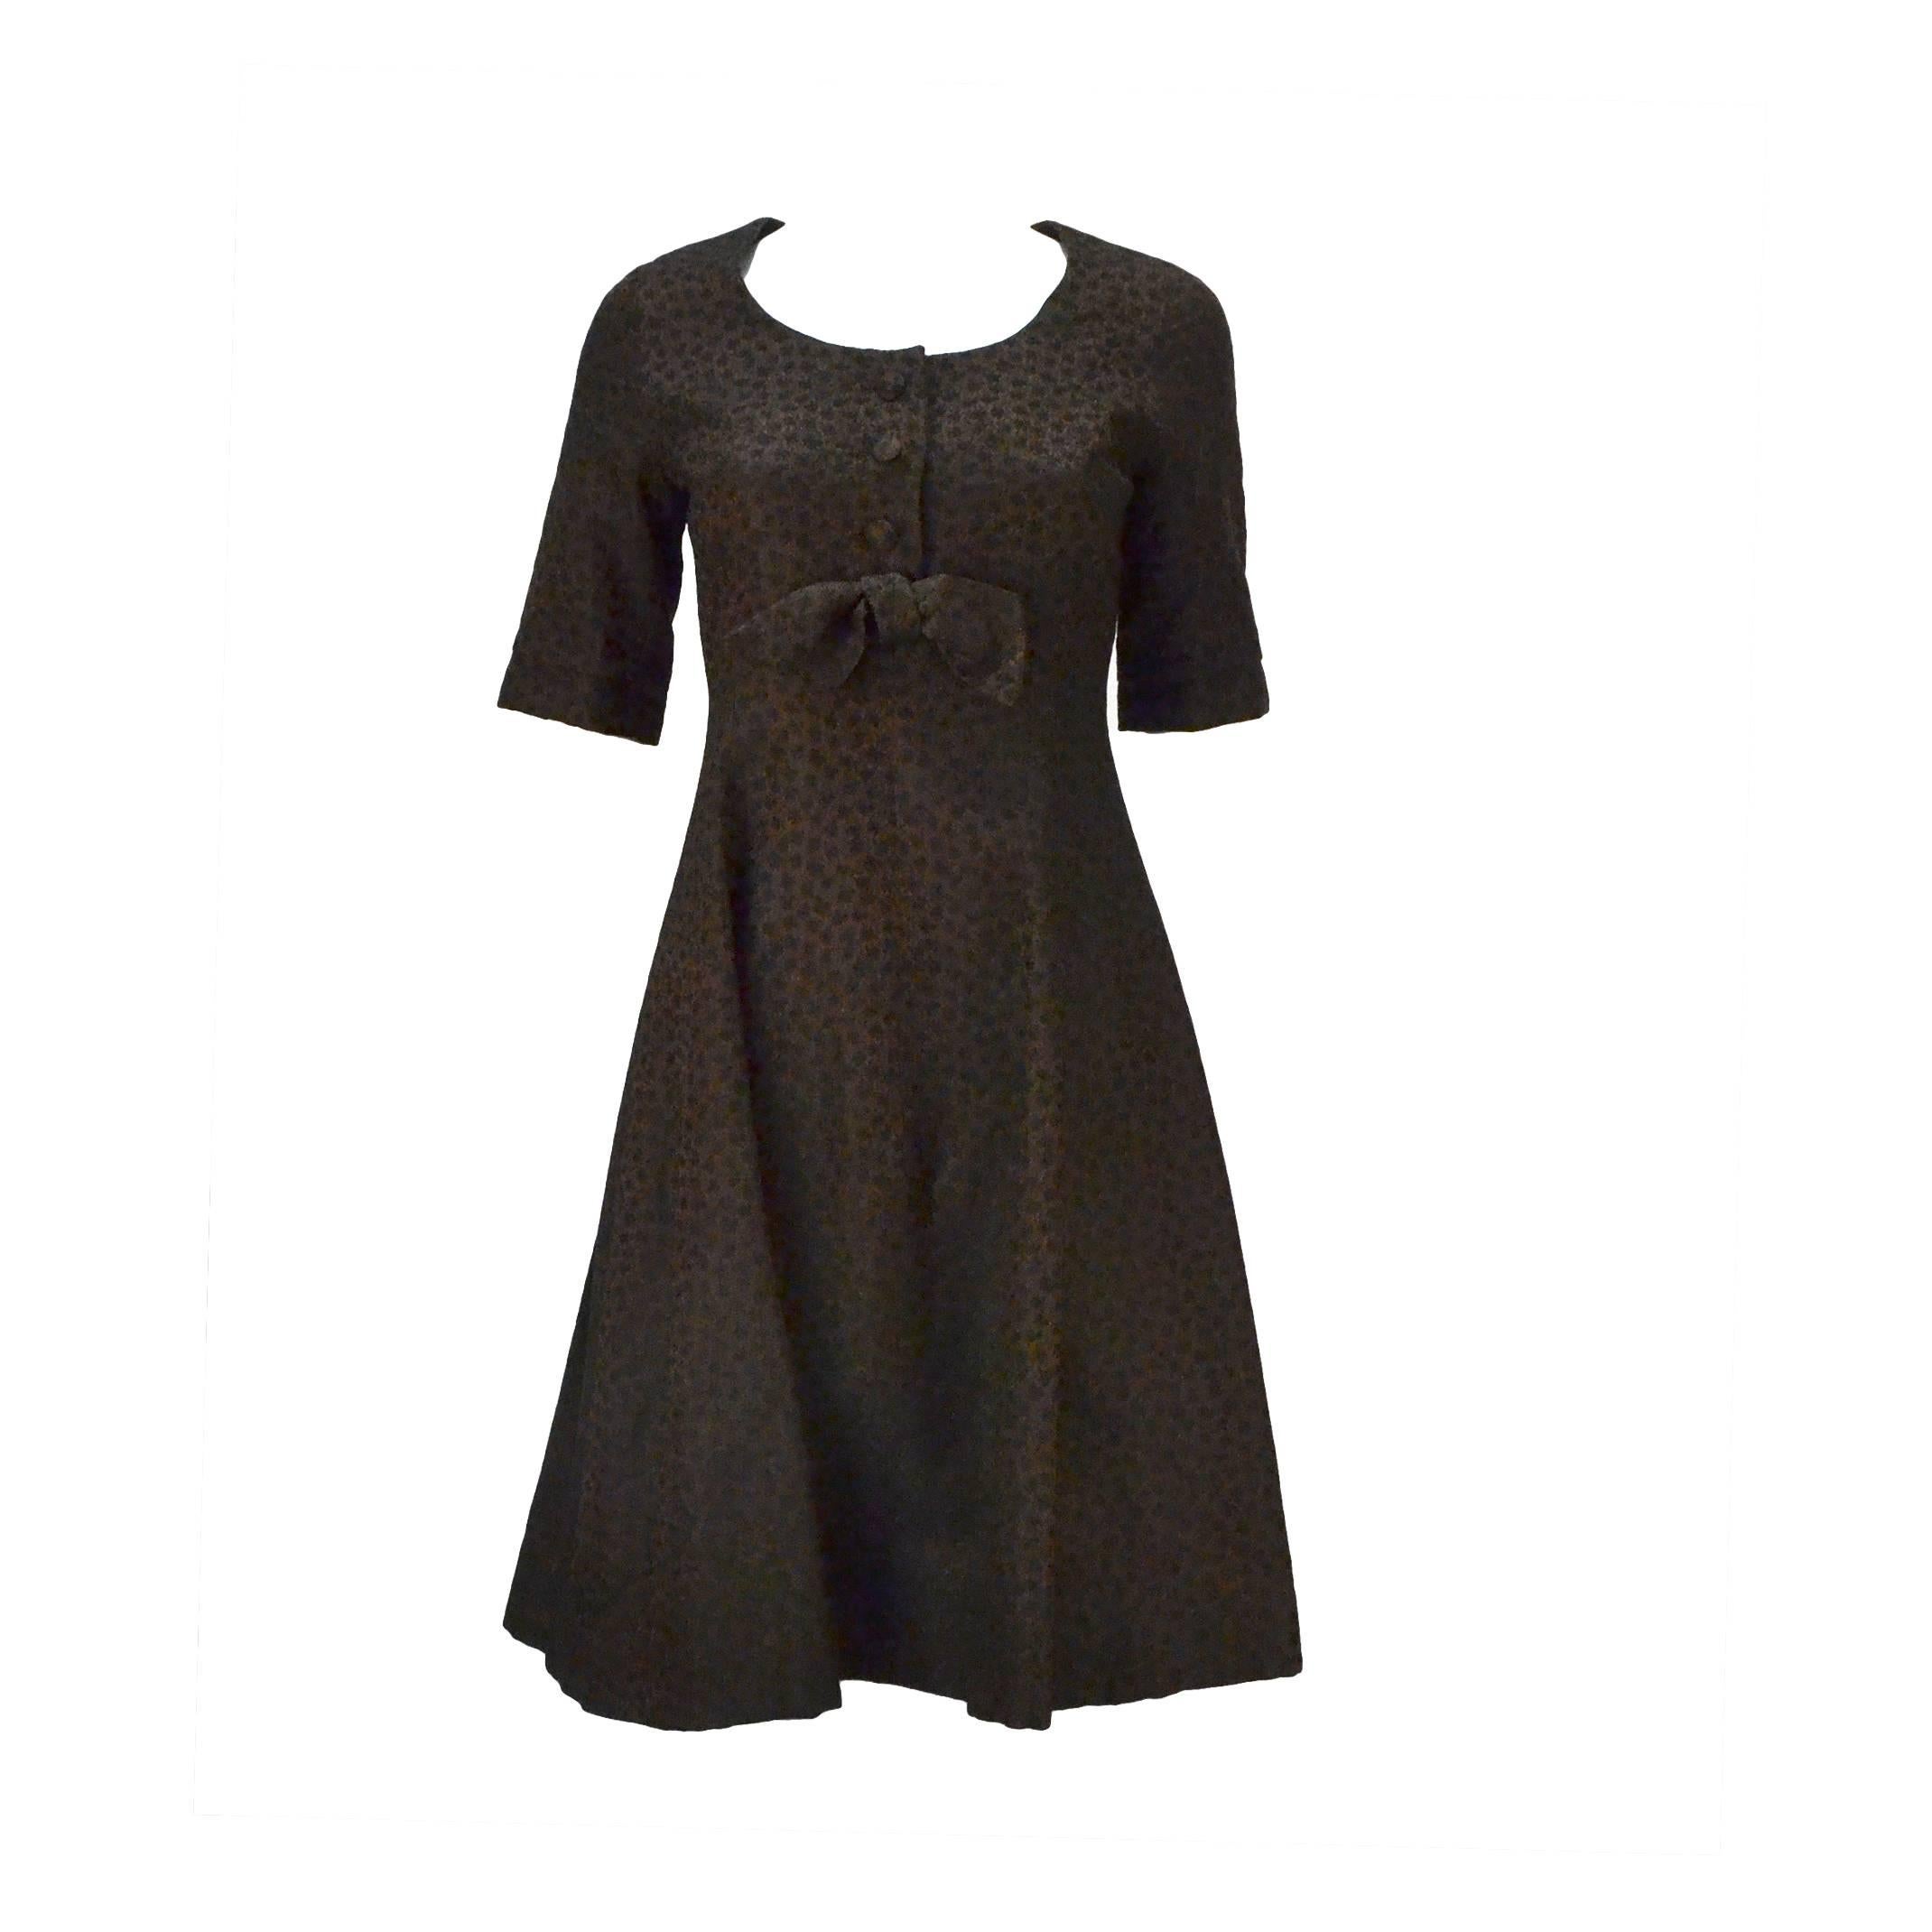 1950s Christian Dior Paris Numbered Brown and Black Dress For Sale